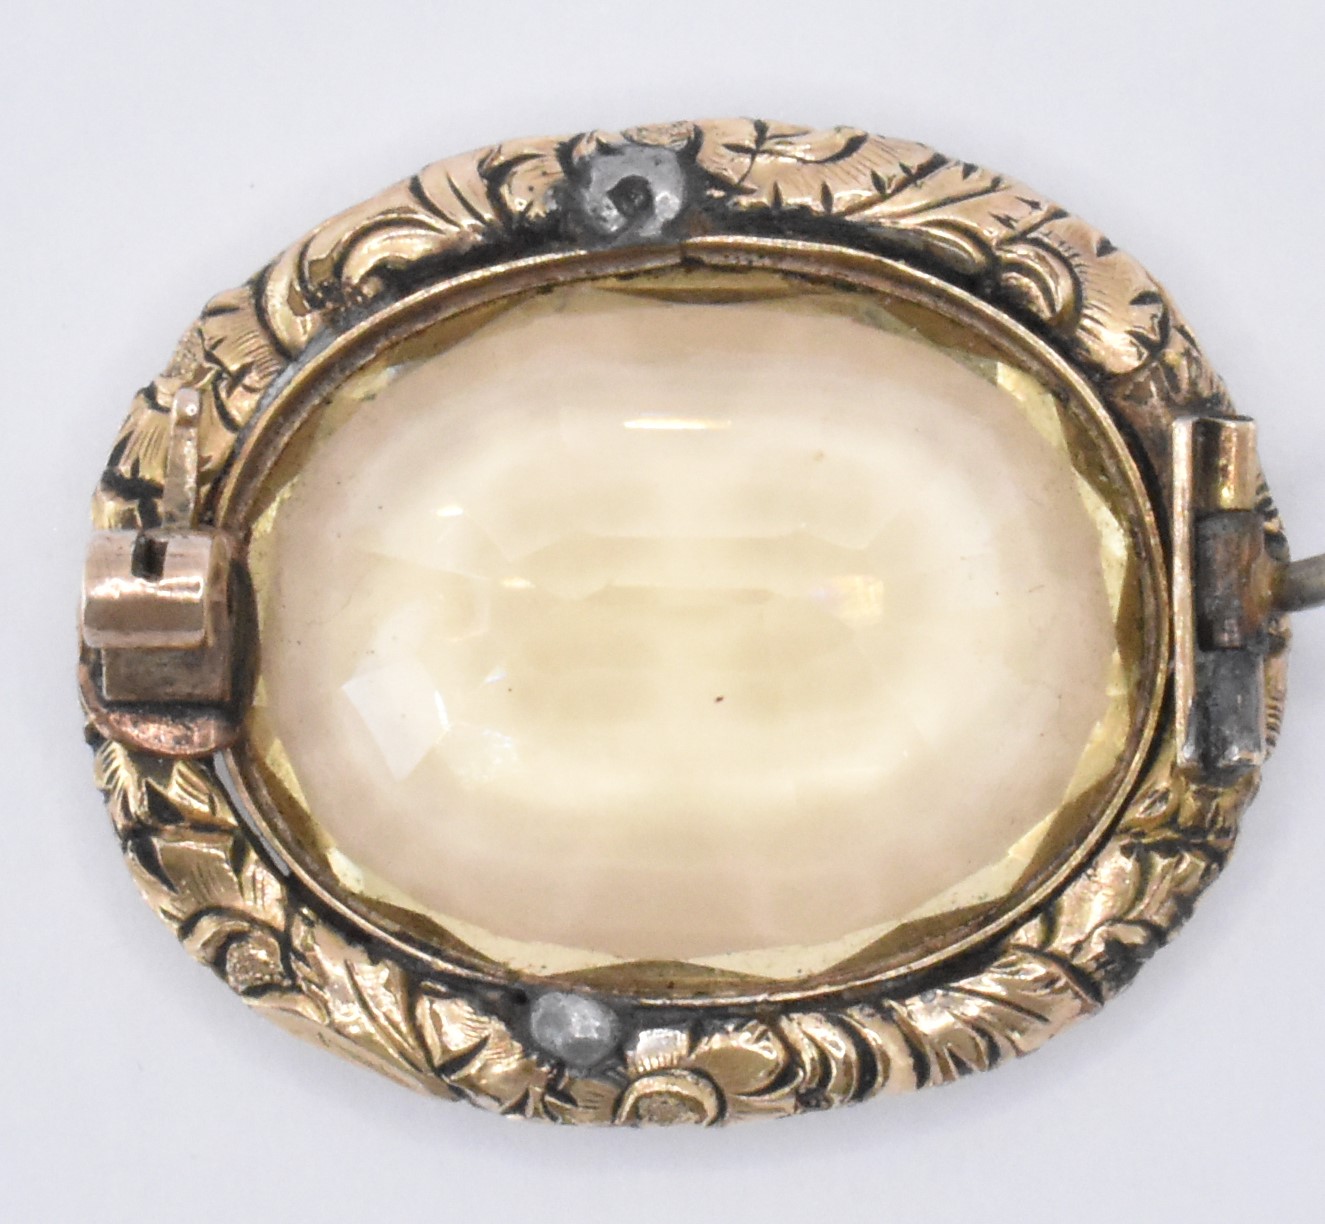 19TH CENTURY GOLD & CITRINE BROOCH PIN - Image 3 of 3